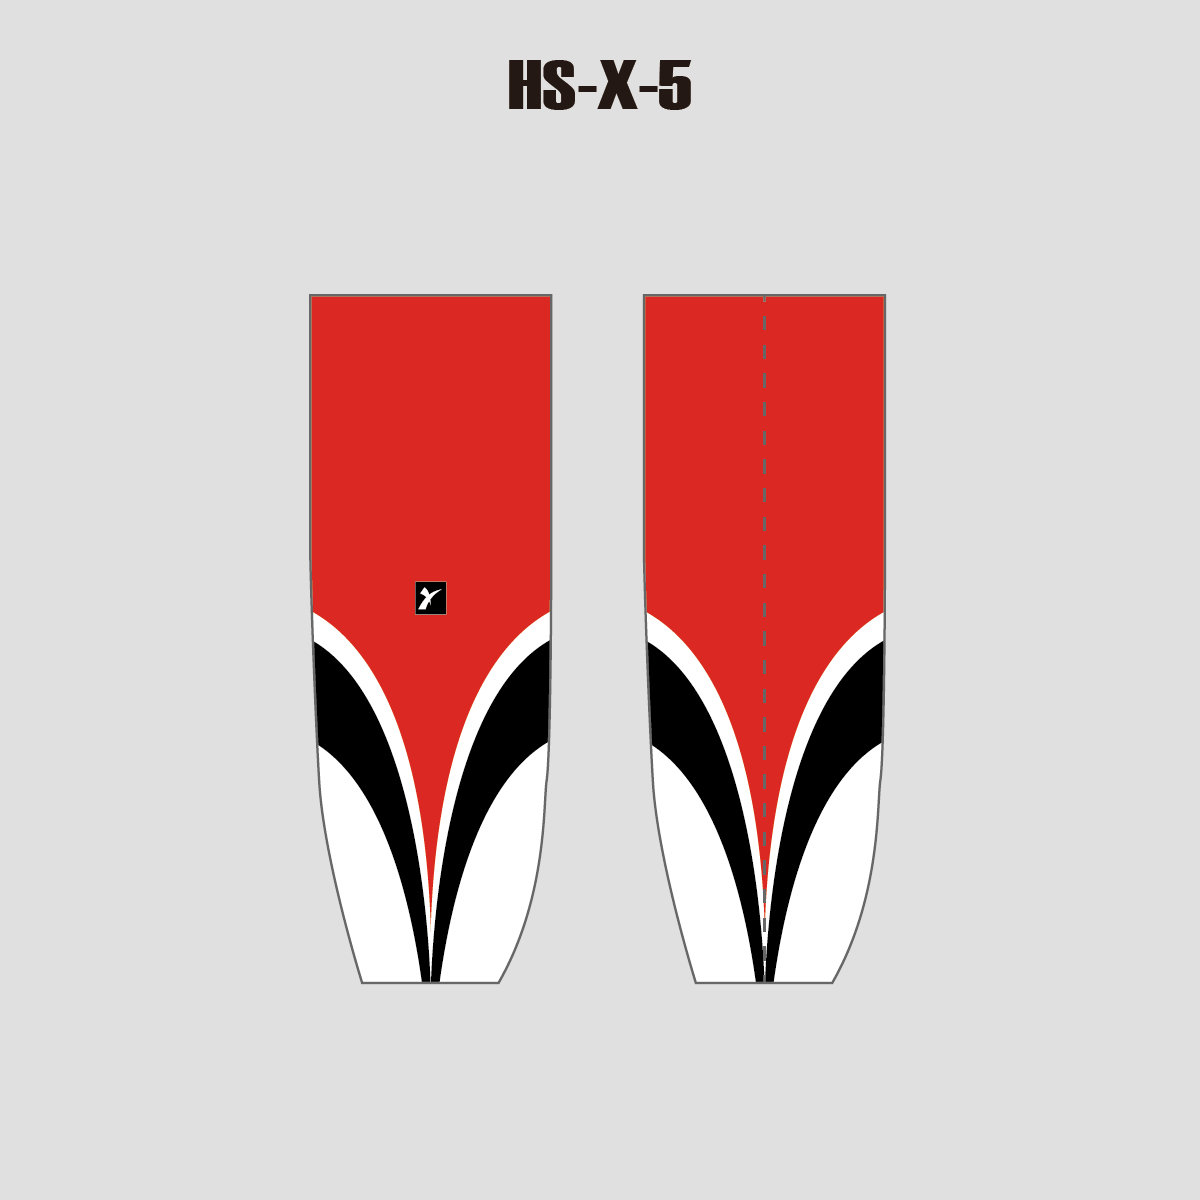 HSX5 Red Black White Custom Adult Youth Hockey Socks - YoungSpeeds